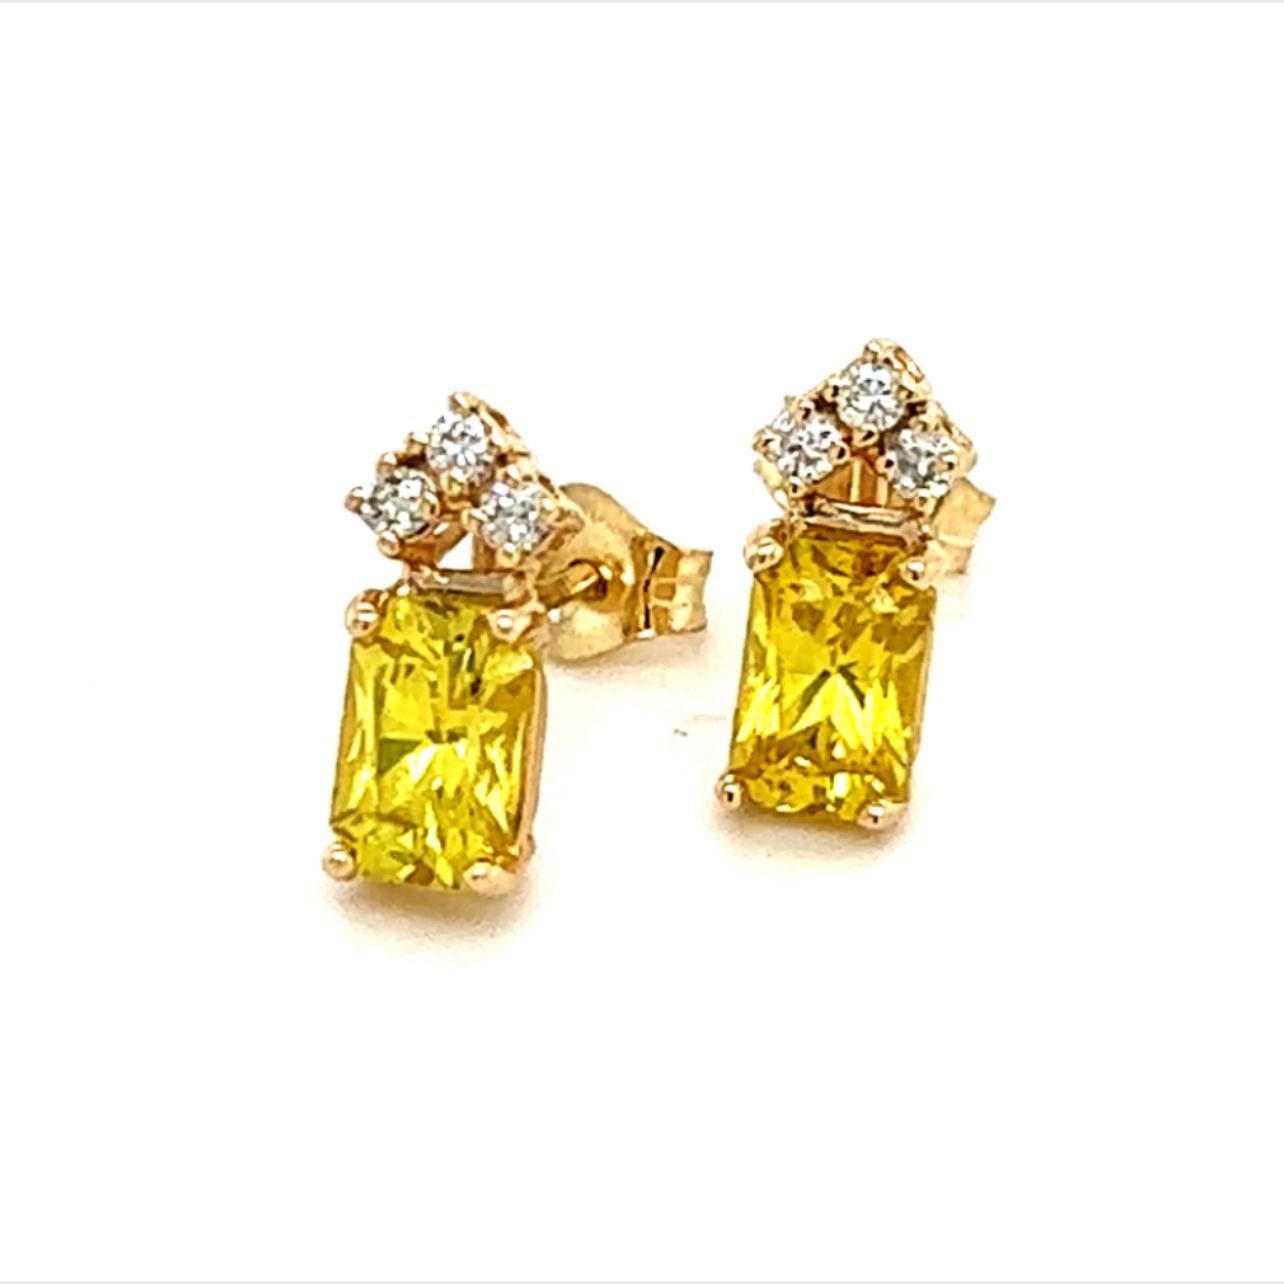 Natural Sapphire Diamond Earrings 14k Gold 1.74 TCW Certified For Sale 3